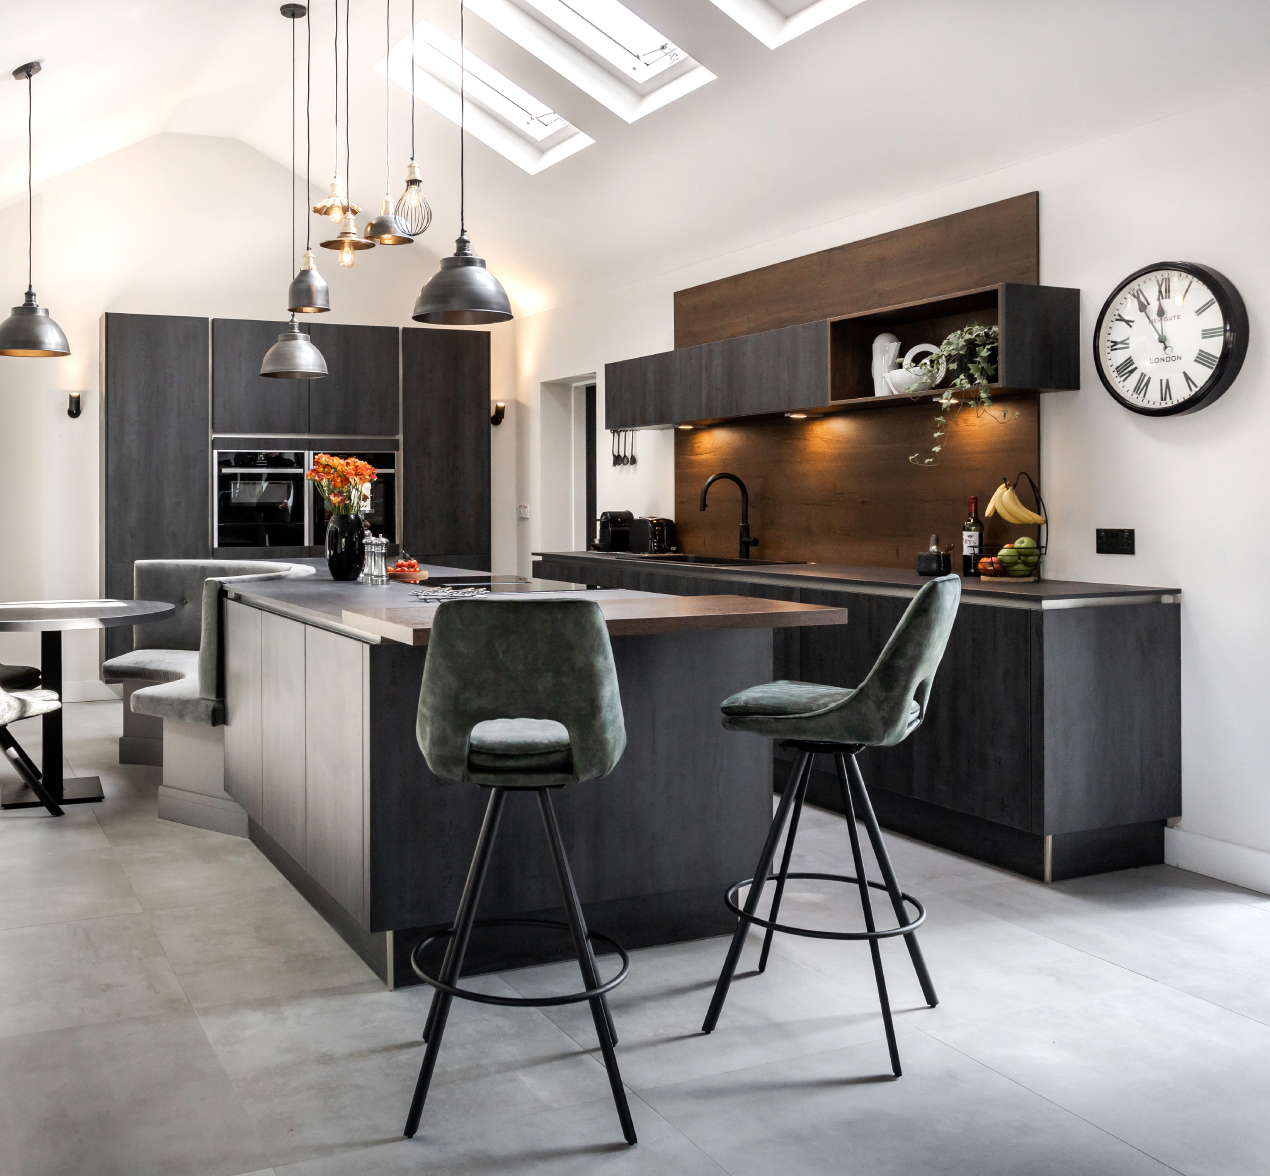 A dark industrial style kitchen with natural tones and textures